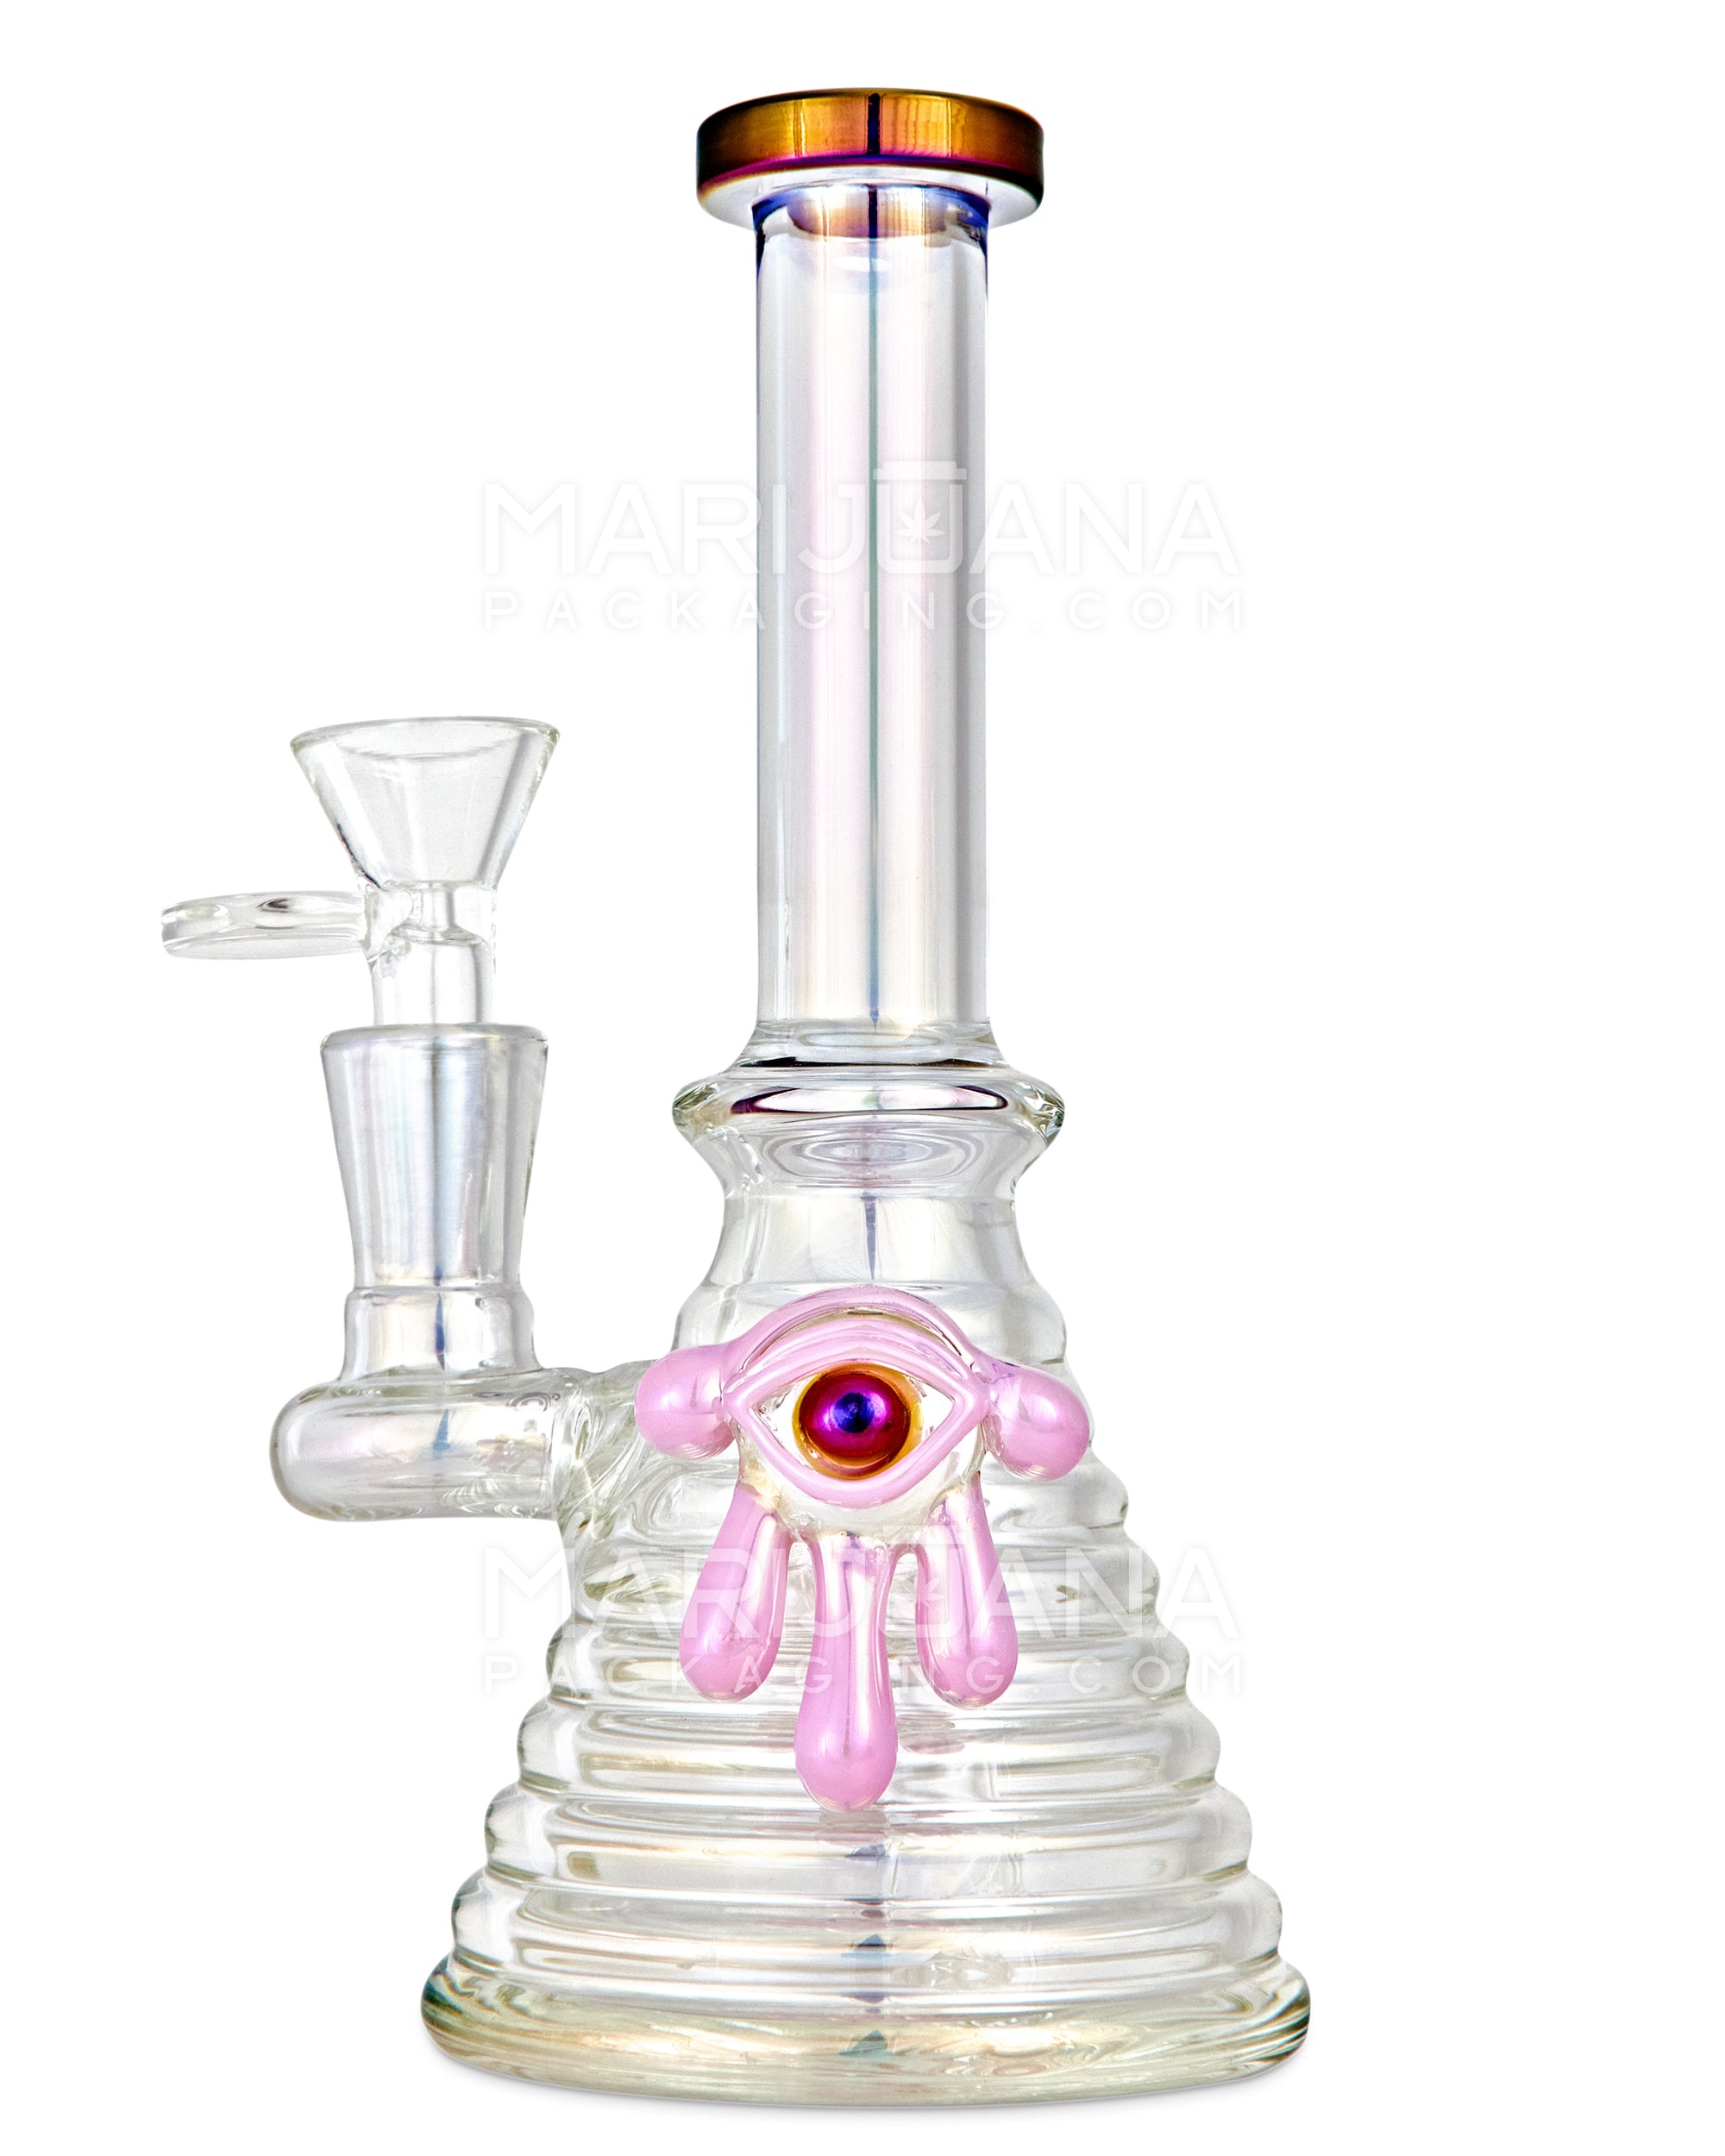 Straight Neck Diffused Perc Glass Ribbed Beaker Water Pipe w/ Pink Evil Eye | 7.5in Tall - 14mm Bowl - Iridescent - 1